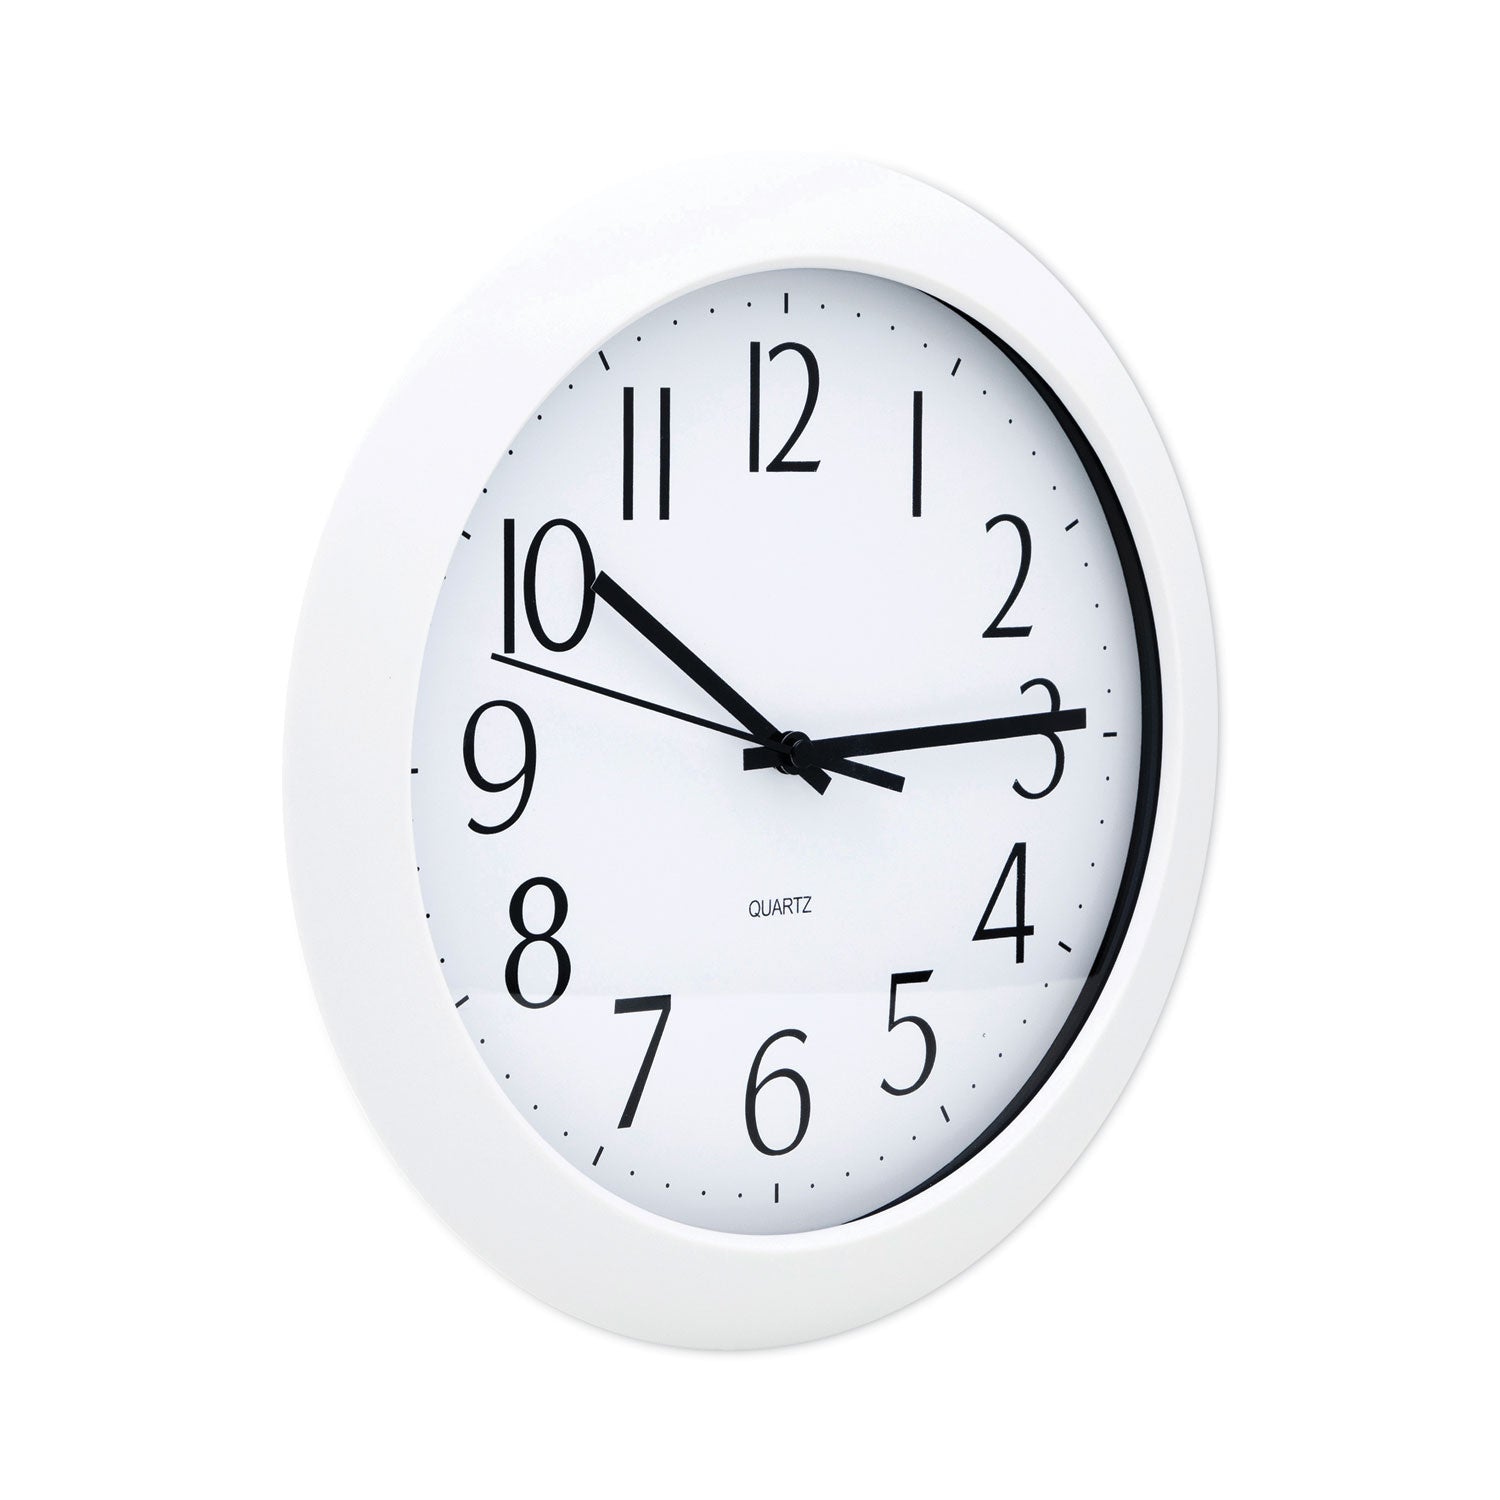 whisper-quiet-clock-12-overall-diameter-white-case-1-aa-sold-separately_unv10461 - 3